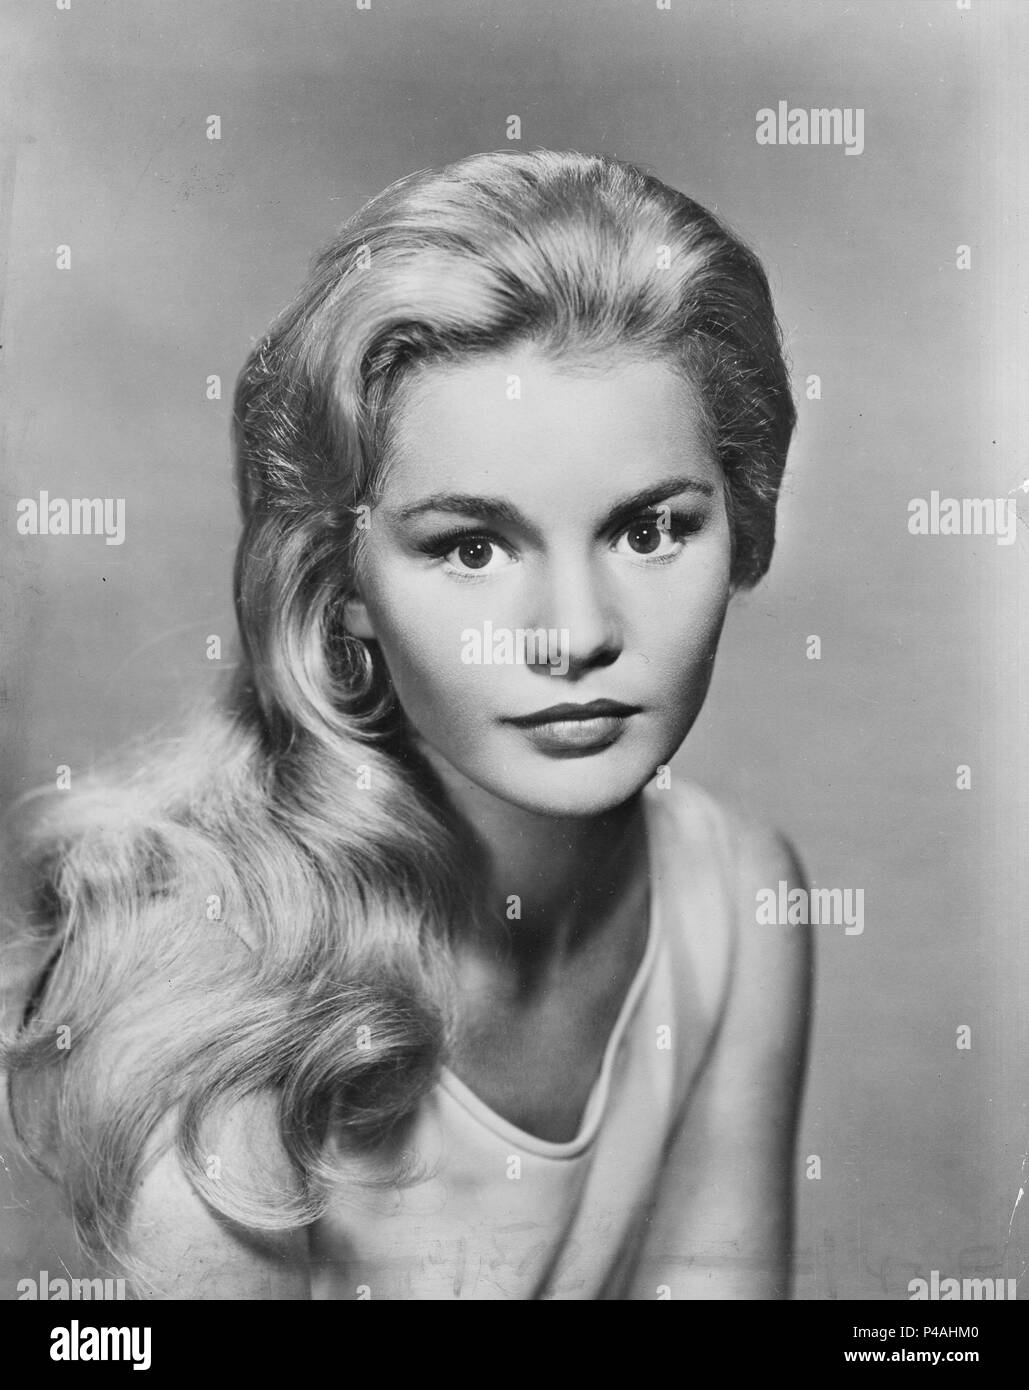 Tuesday Weld, Movies and Filmography